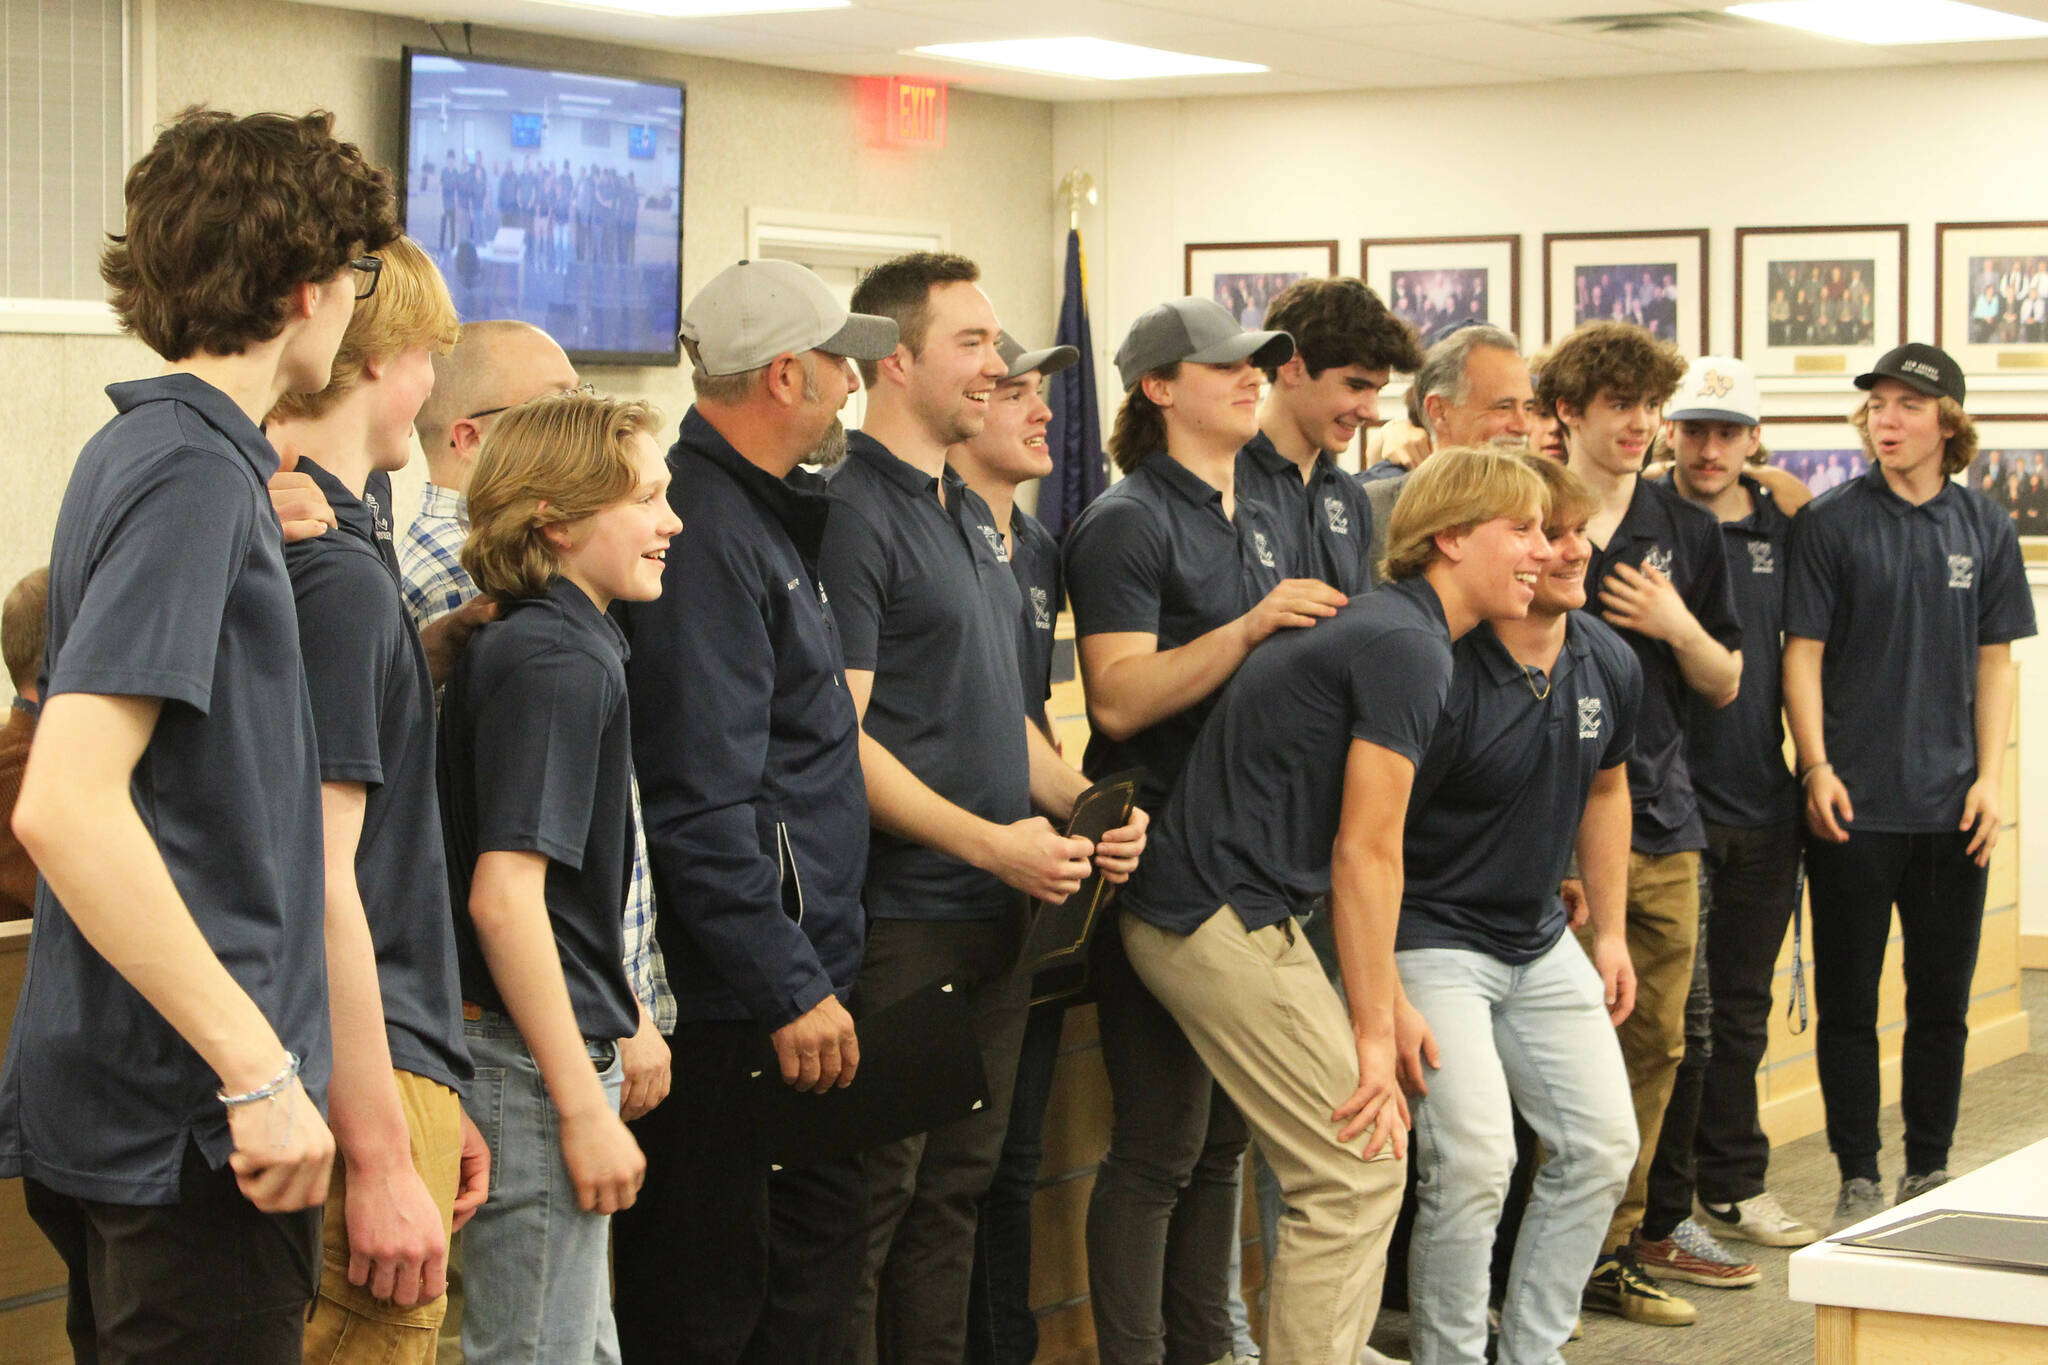 The Soldotna High School hockey team is recognized for winning the 2023 Division II state hockey championship during a Kenai Peninsula Borough Assembly meeting on Tuesday, April 4, 2023, in Soldtona, Alaska. (Ashlyn O’Hara/Peninsula Clarion)